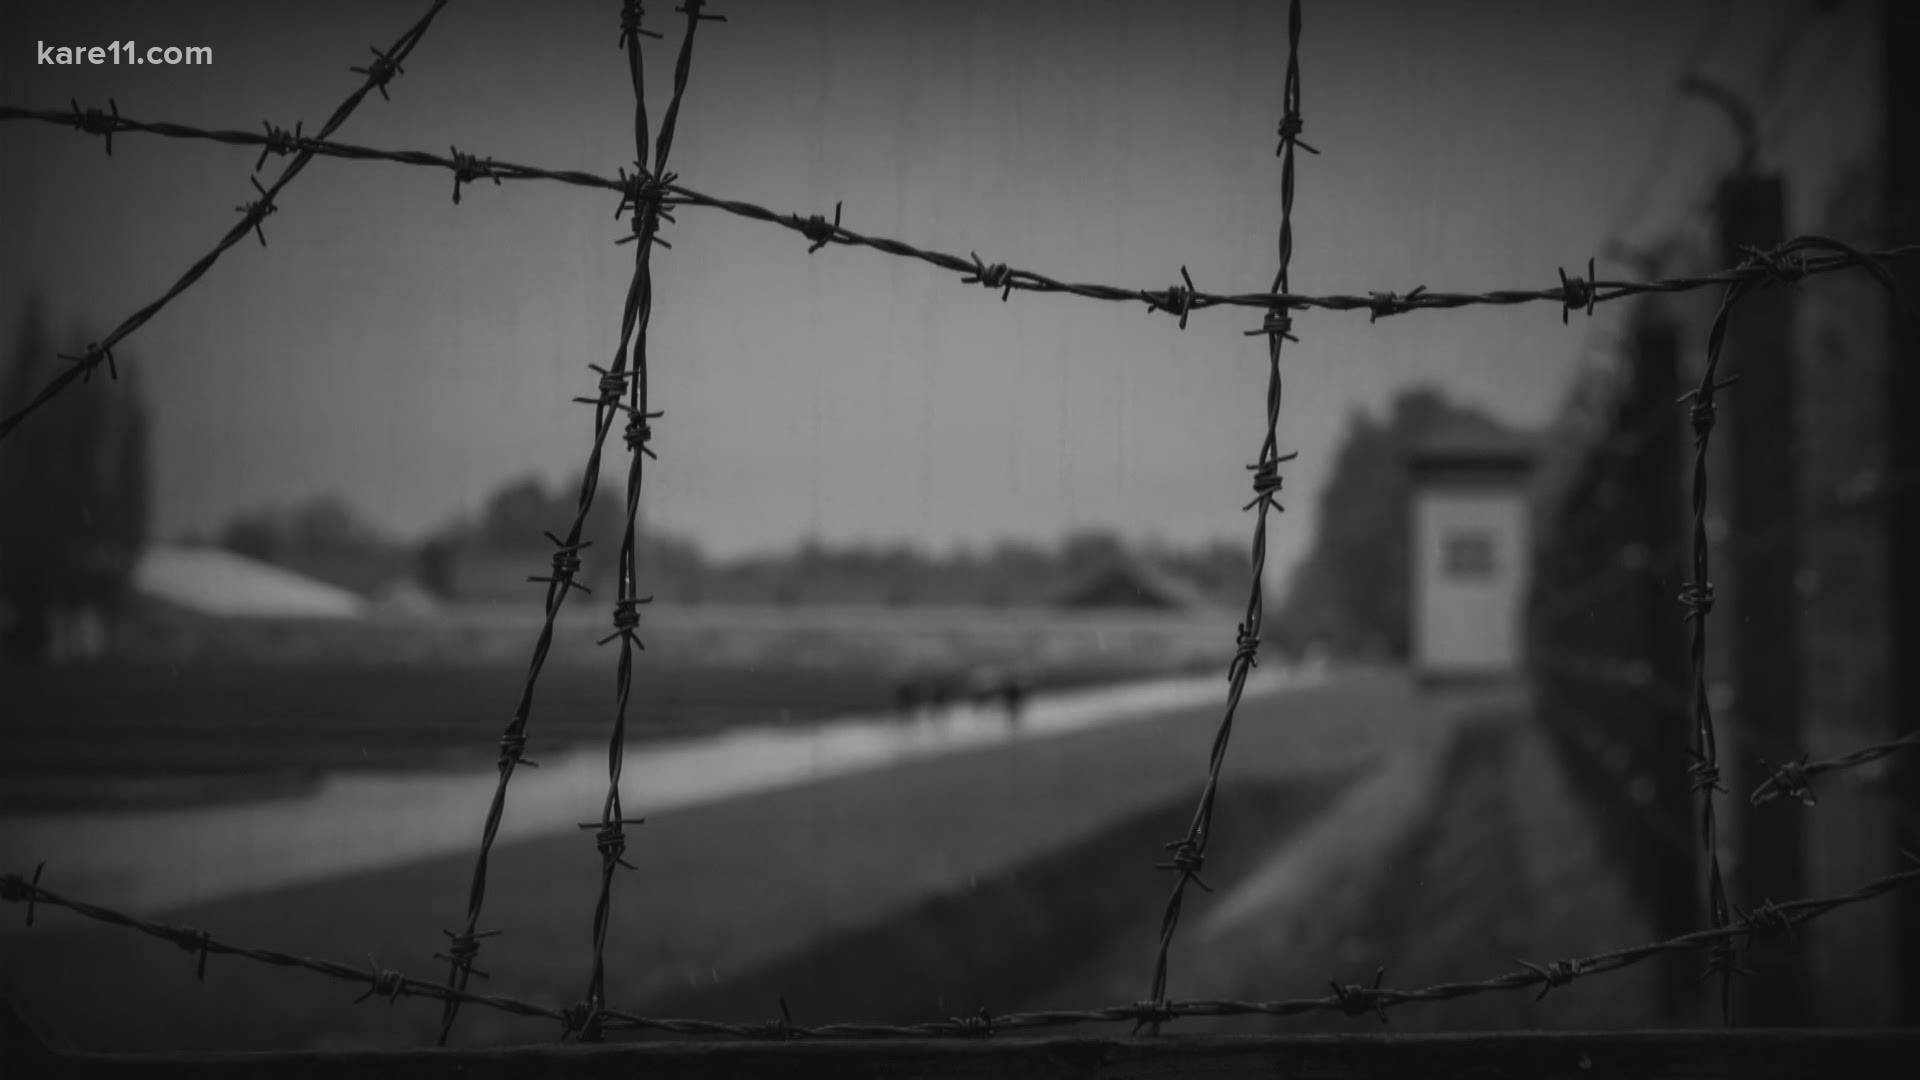 A recent survey shows 53% of Minnesotans between the ages of 18 and 39 didn't know how many people were killed in the Holocaust.